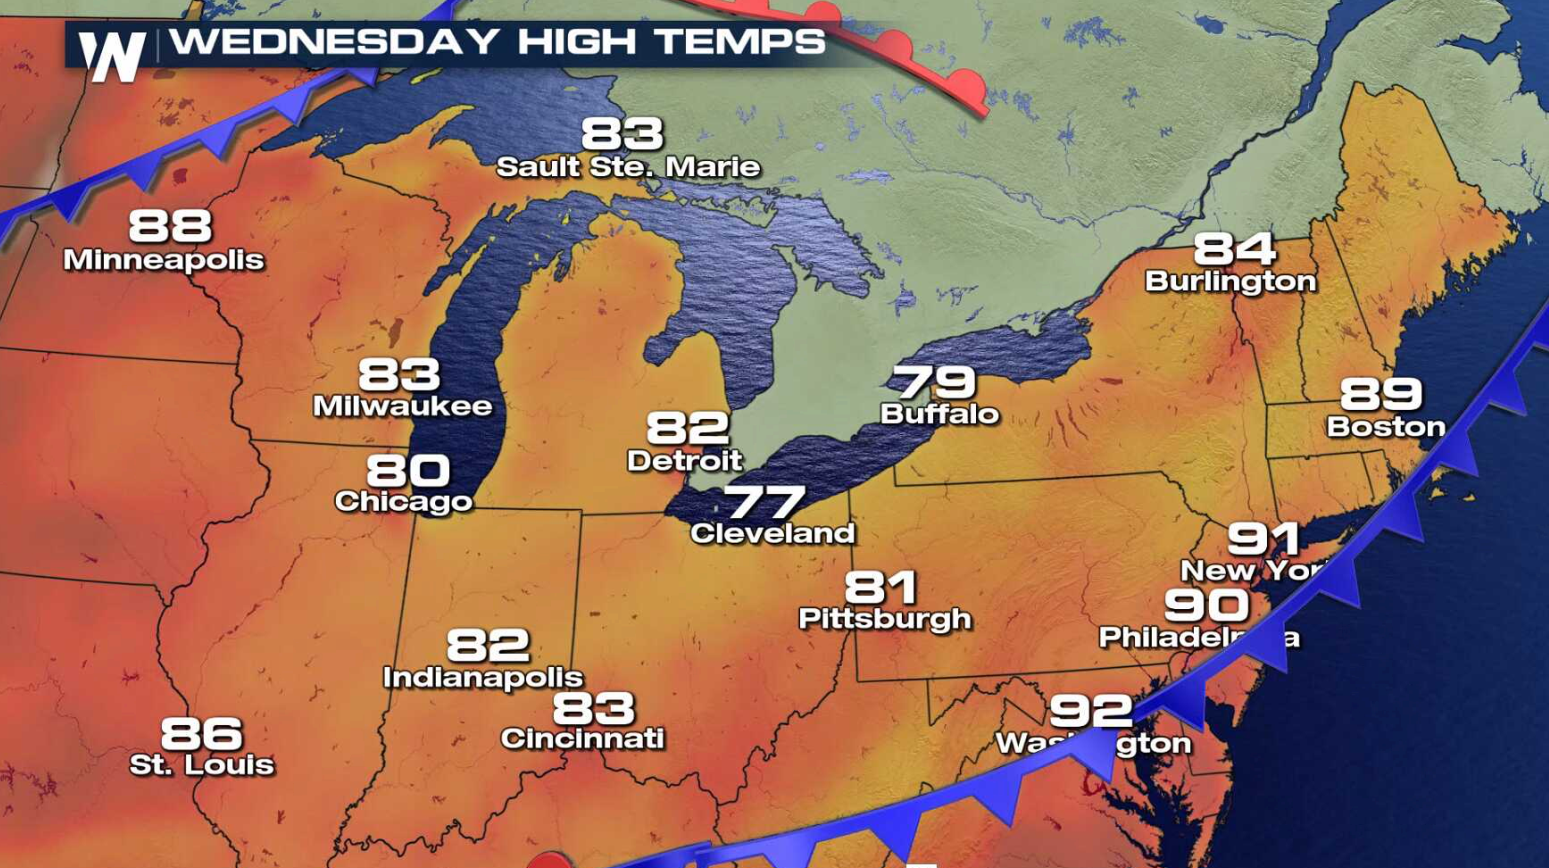 Heat to Start the Workweek in the Northeast